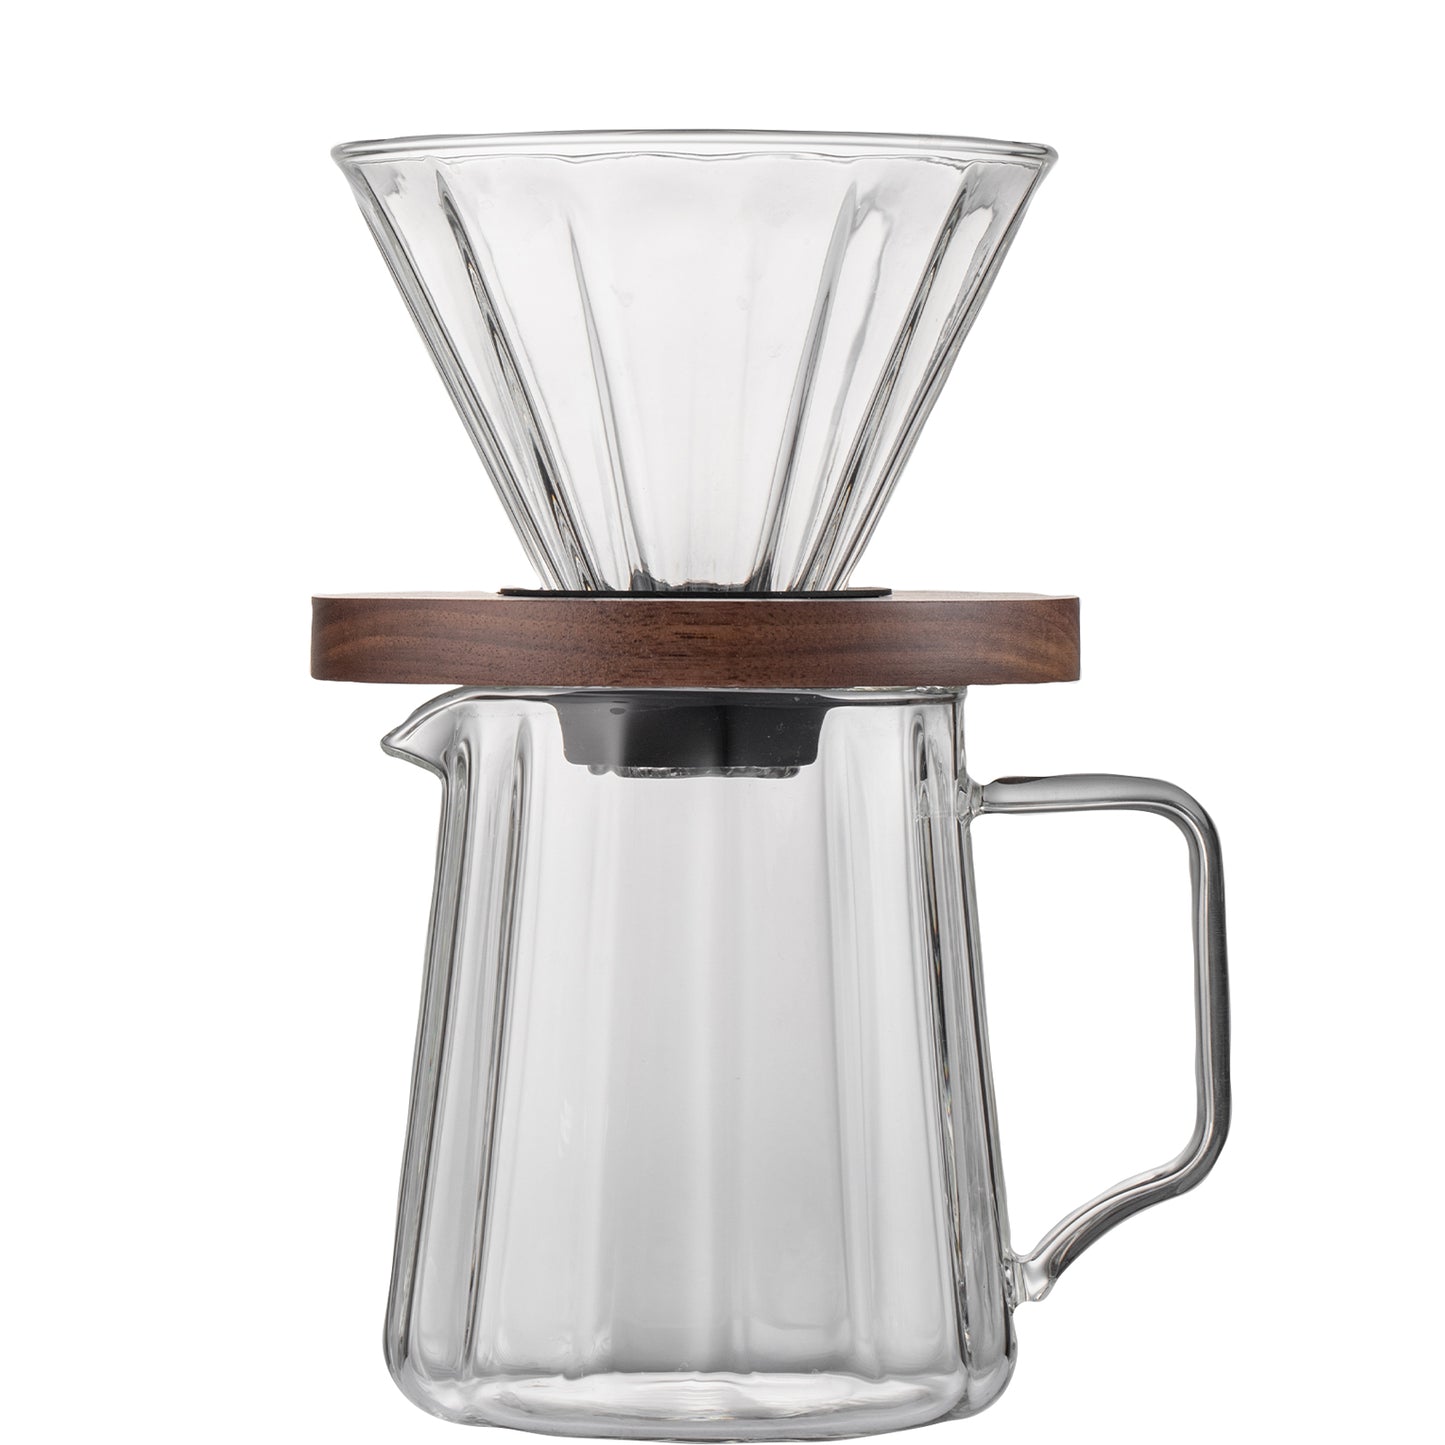 Puricon Pour Over Coffee Maker with V60 Paper Filter 40 Sheets, Holds 1 to  2 Cups, 15oz Coffee Dripper Set Borosilicate Glass Coffee Carafe Brewer